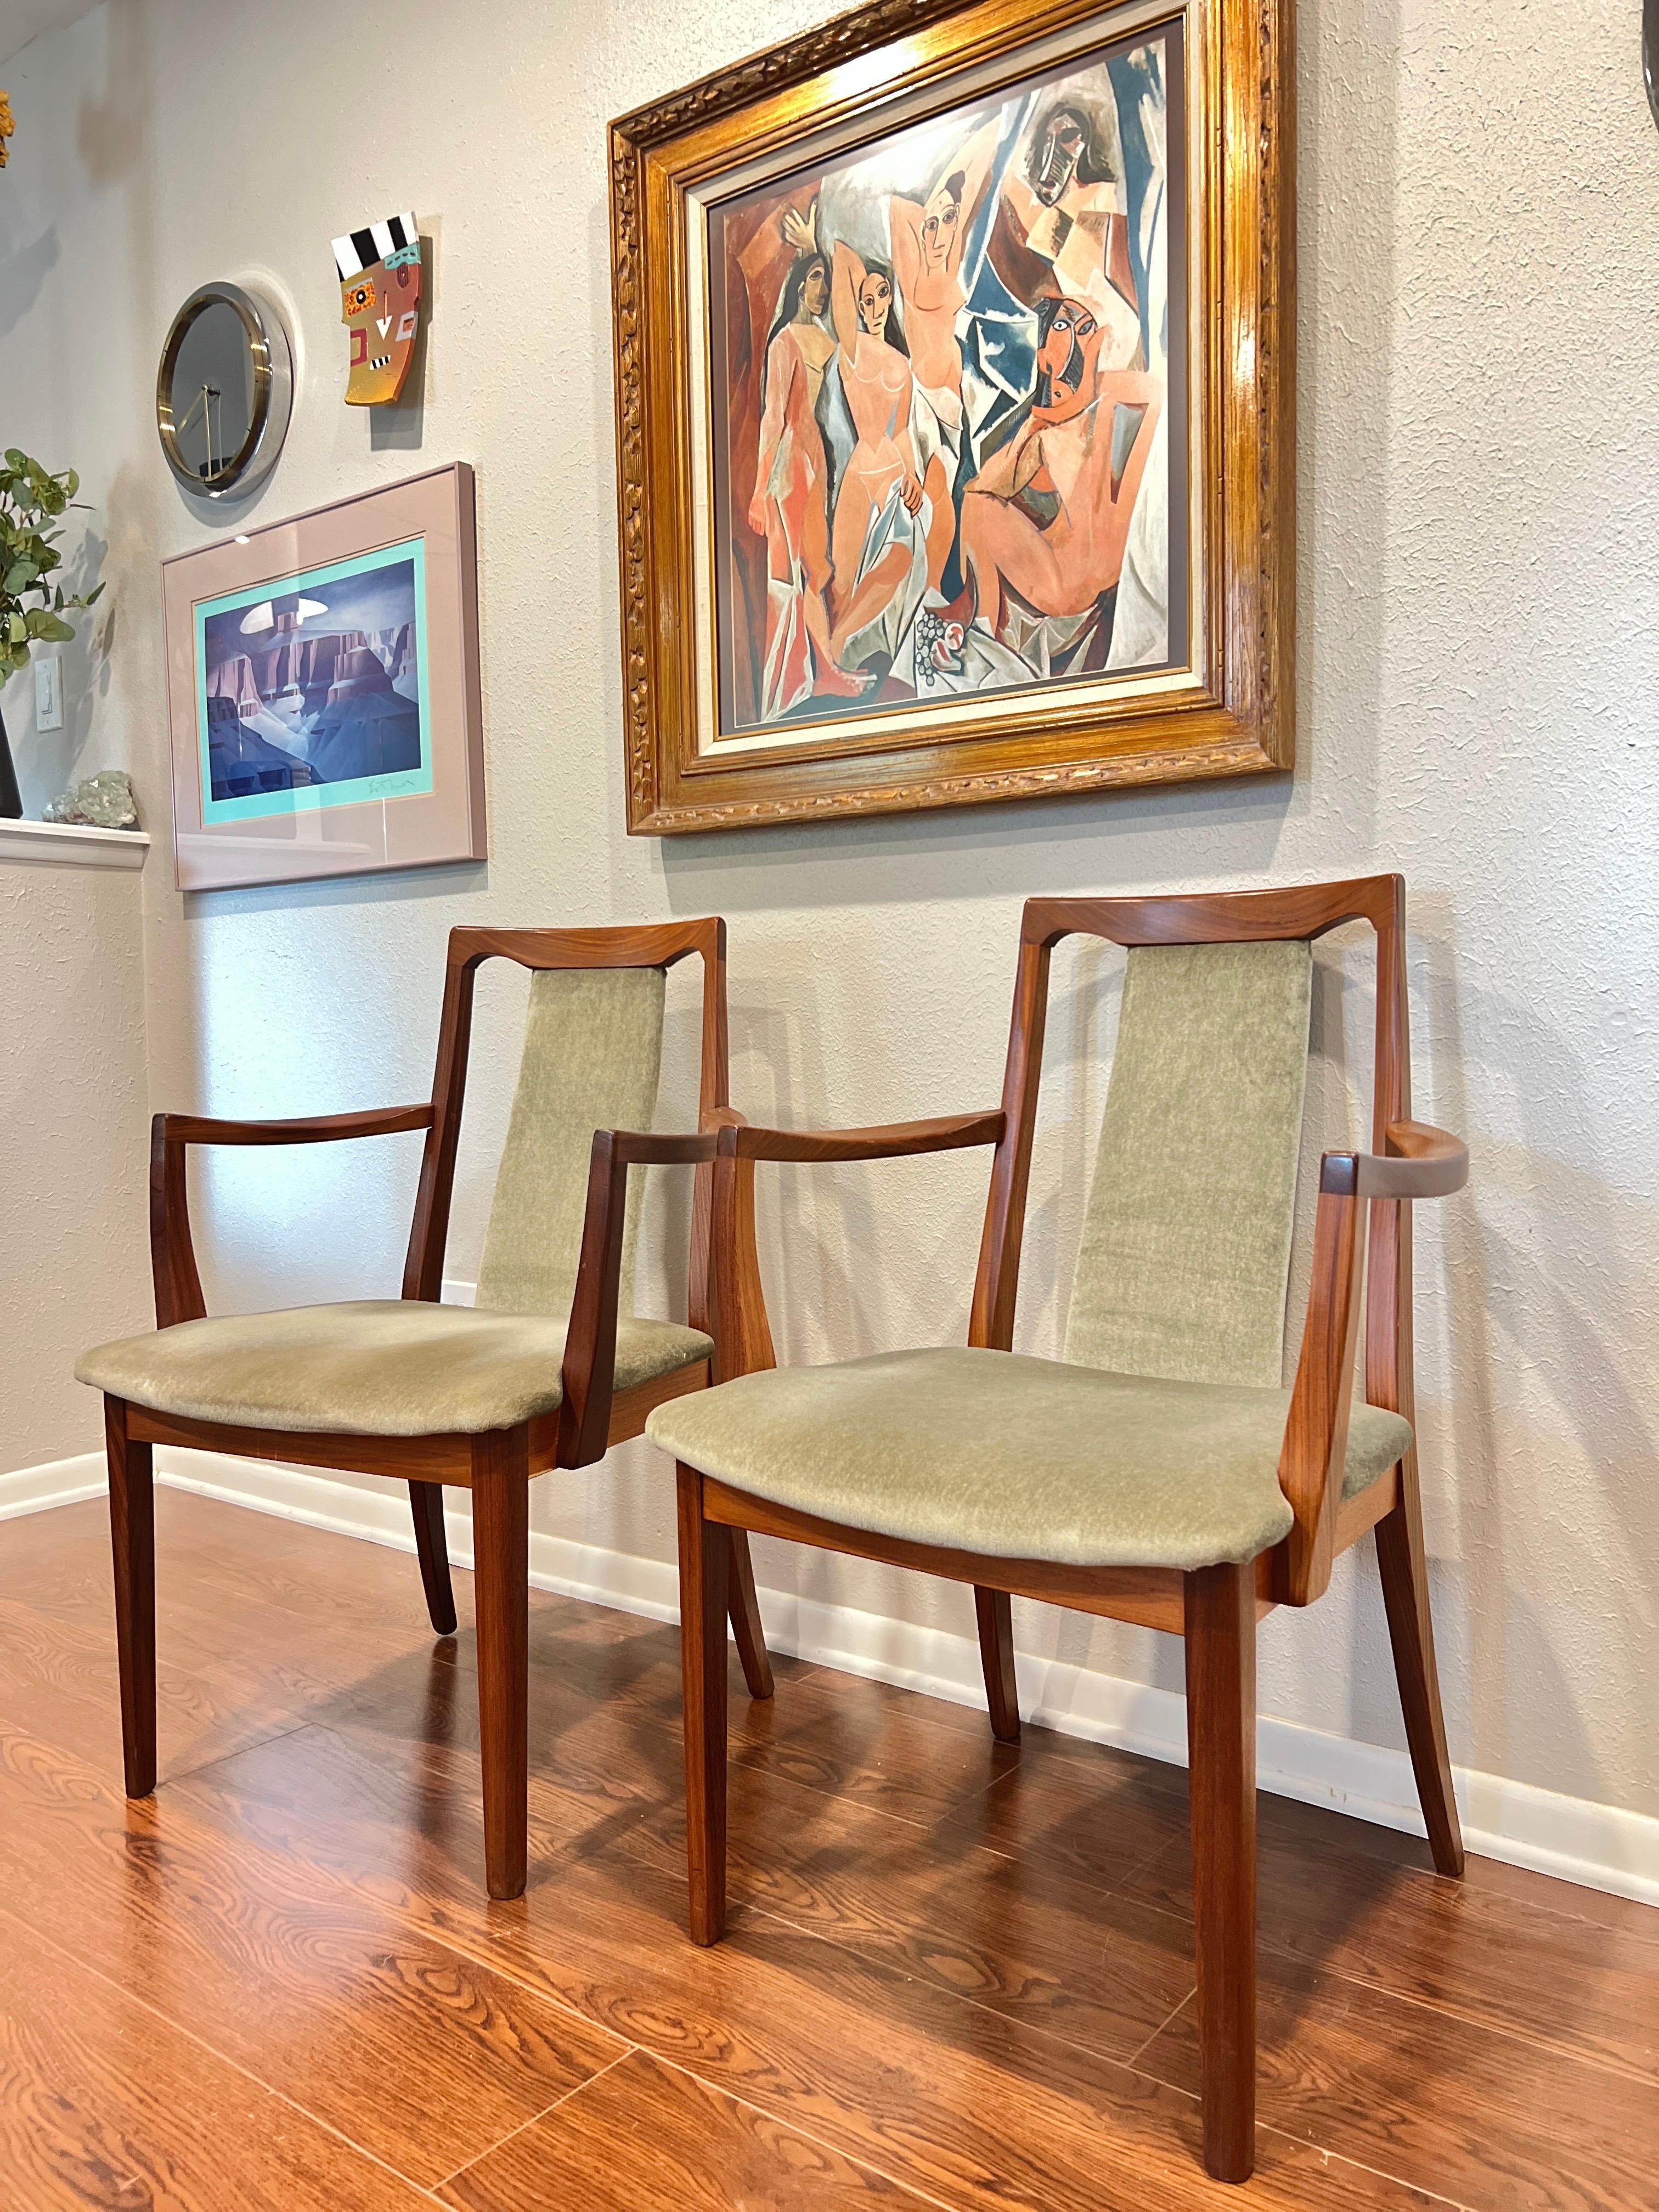 Velvet A set of 6 mid century modern style dining chairs by G plan, circa 1980s